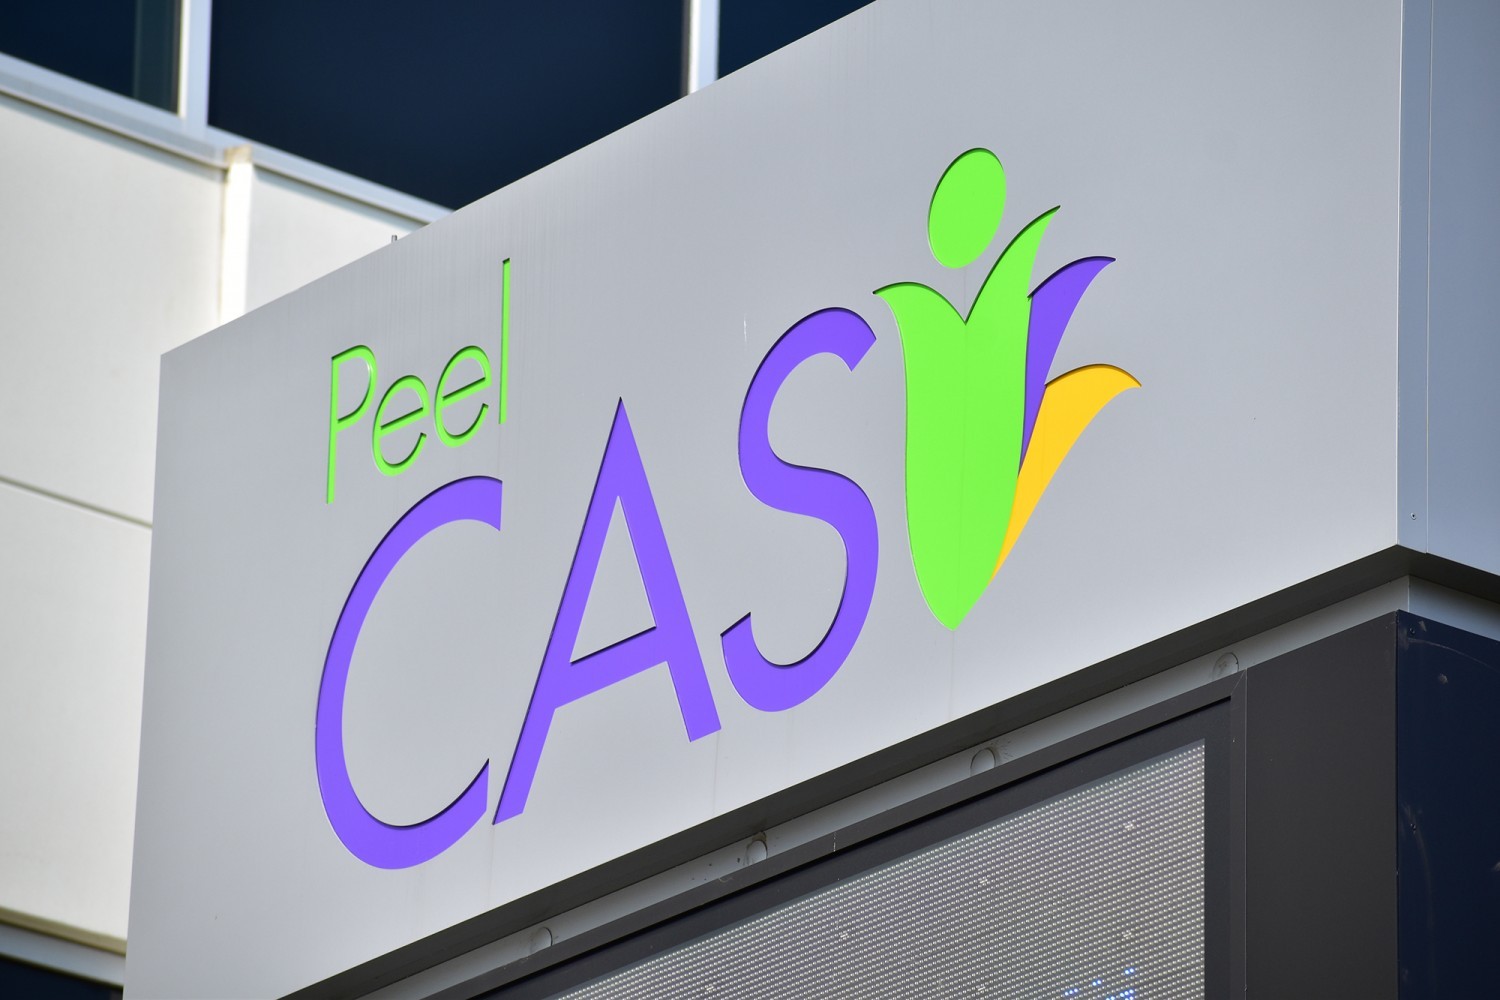 Head of finance at ‘seriously troubled’ child welfare organization on leave: what next for Peel CAS?